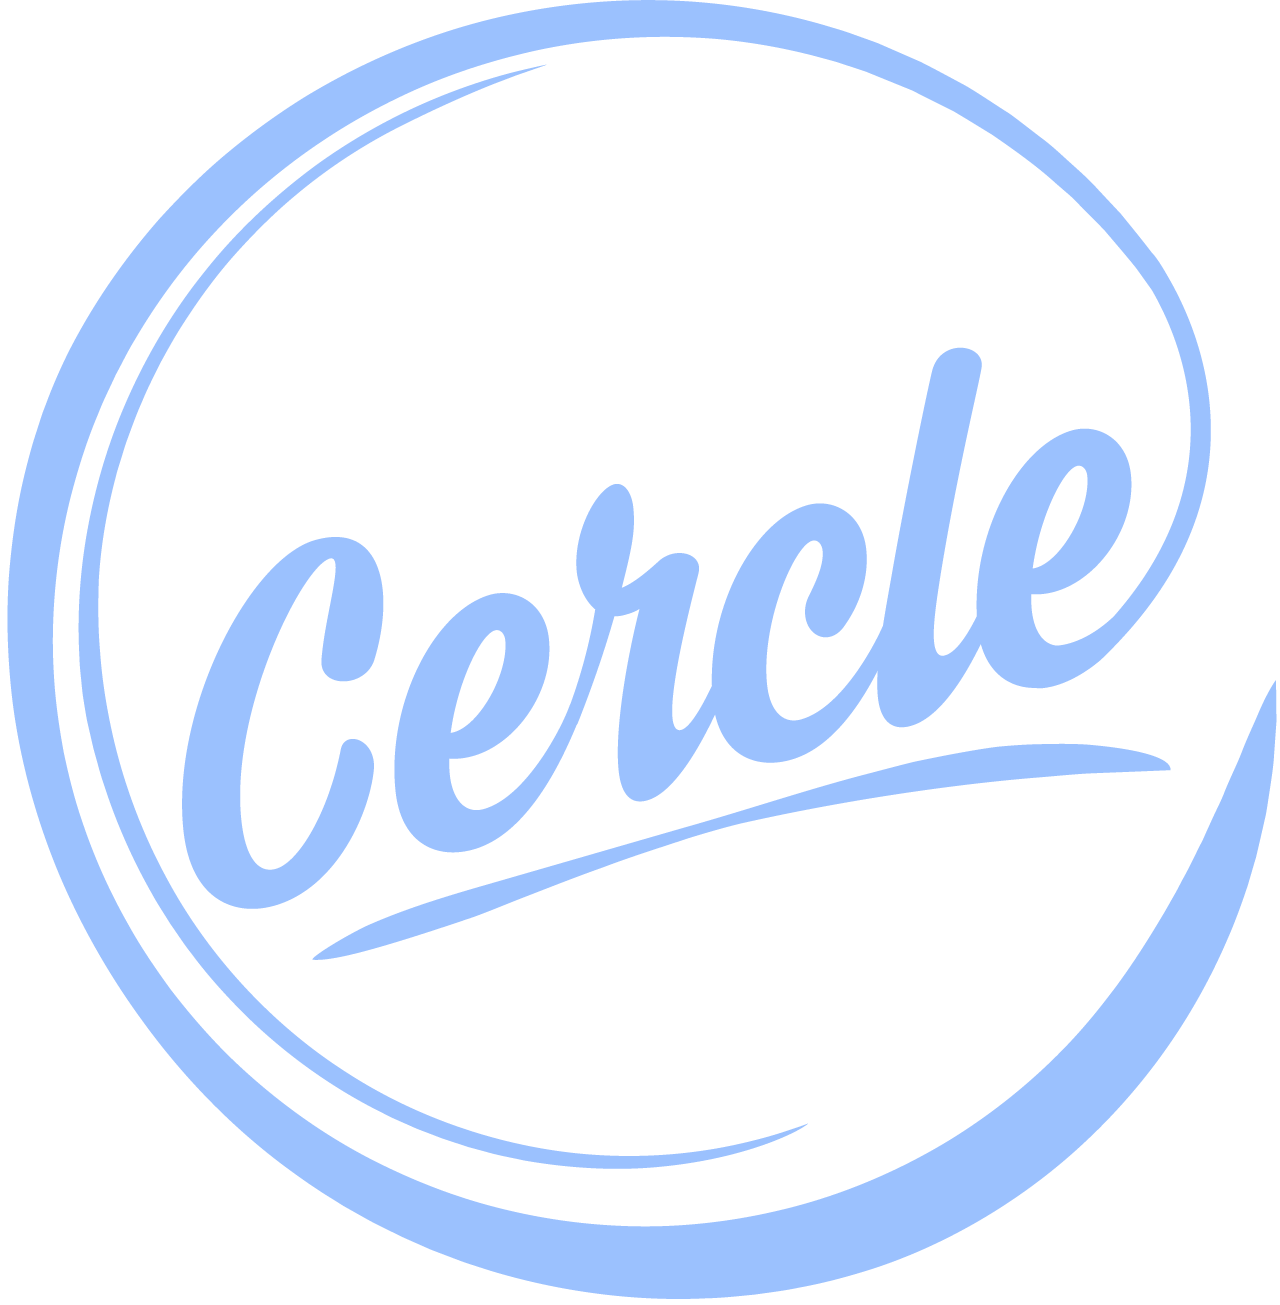 Cercle has launched its first podcast series ‘Echo System’